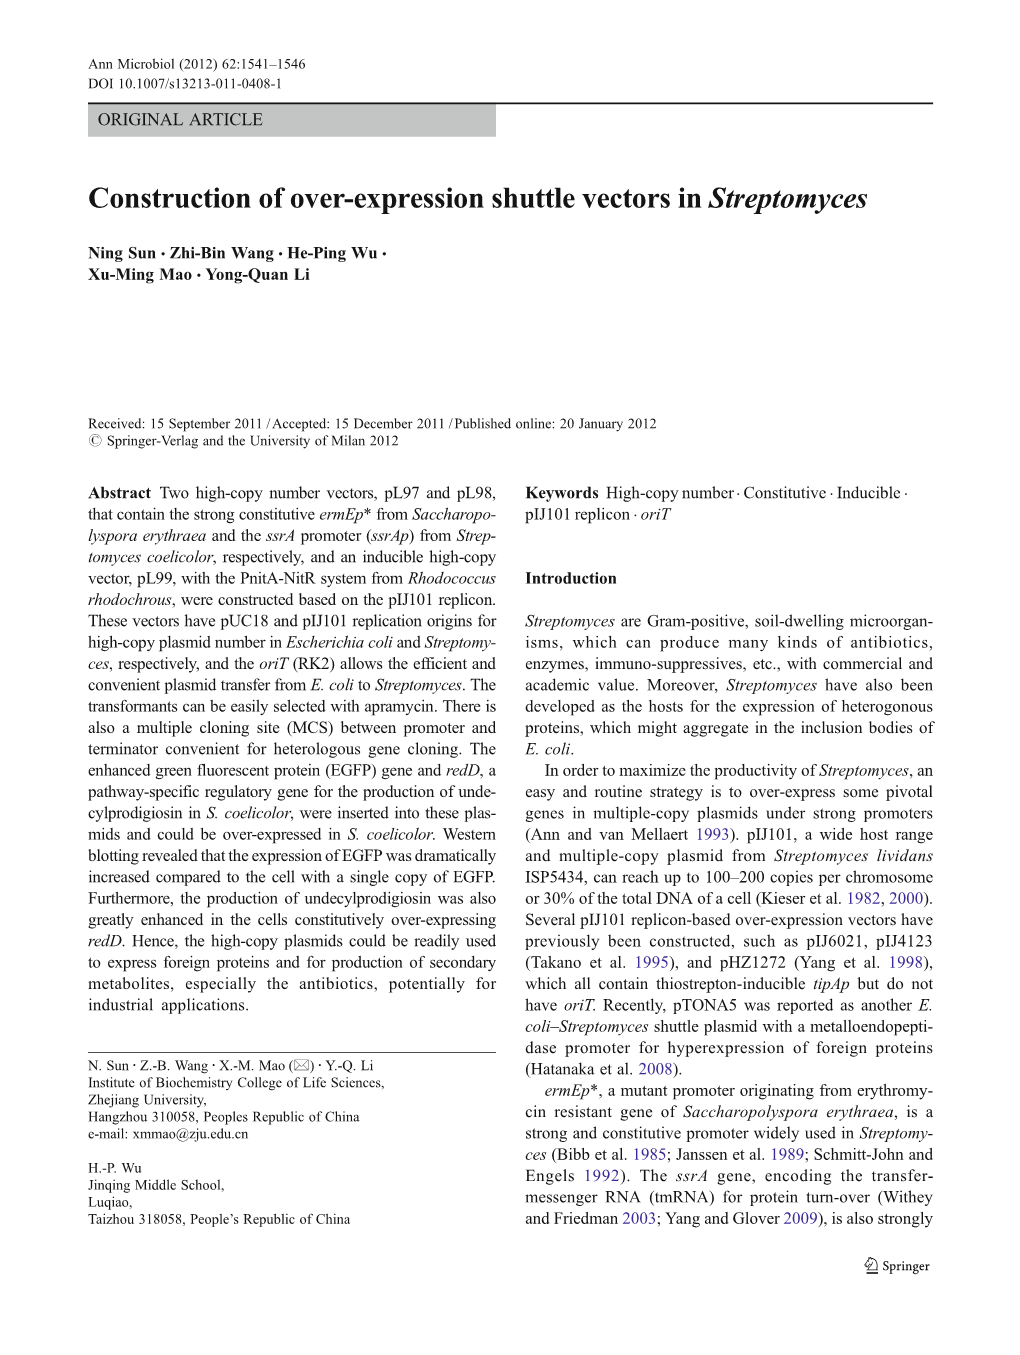 Construction of Over-Expression Shuttle Vectors in Streptomyces